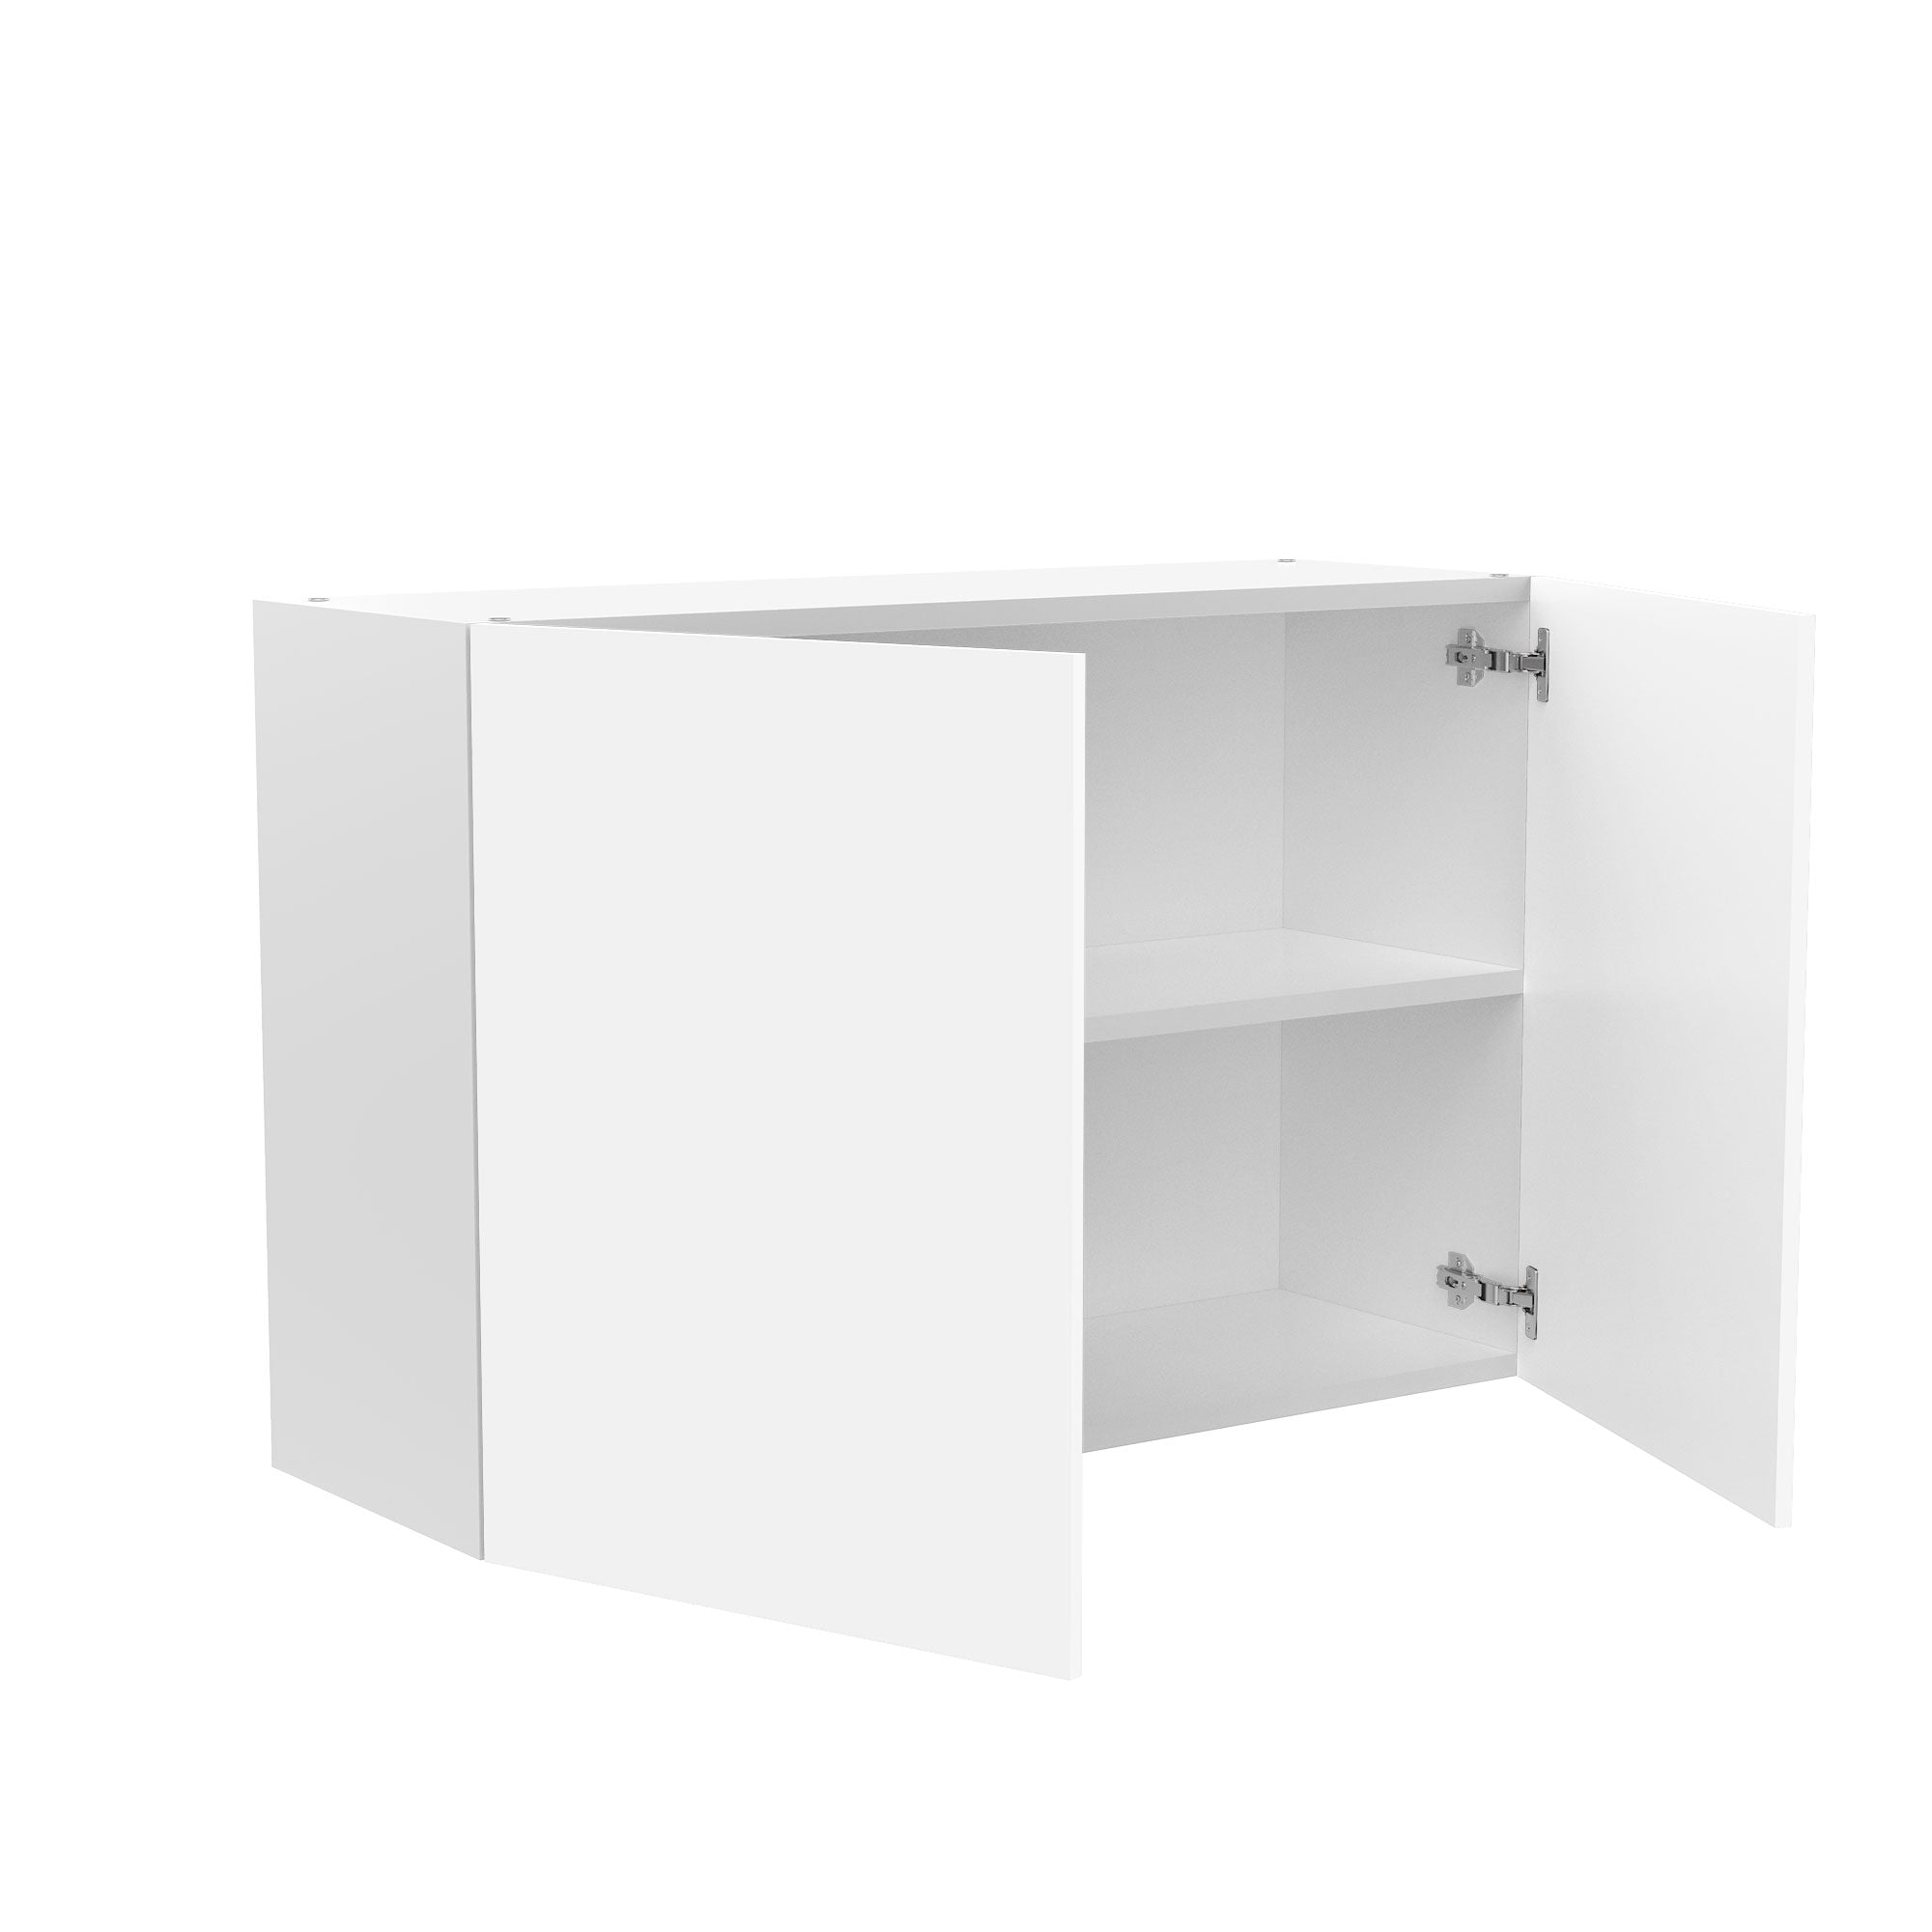 RTA - Glossy White - Double Door Wall Cabinets | 36"W x 24"H x 12"D